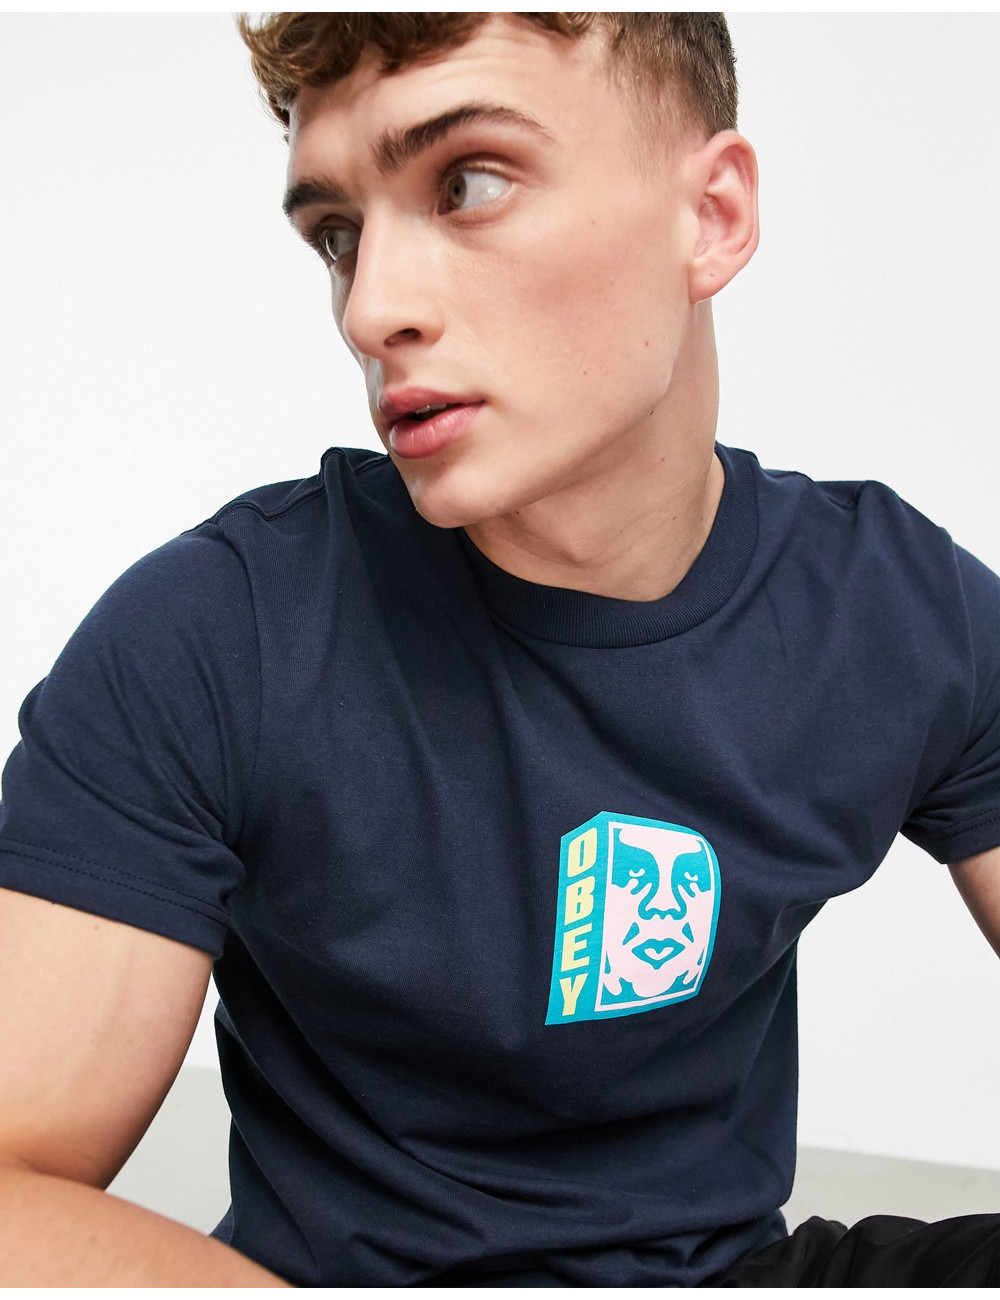 Obey face logo t-shirt in navy